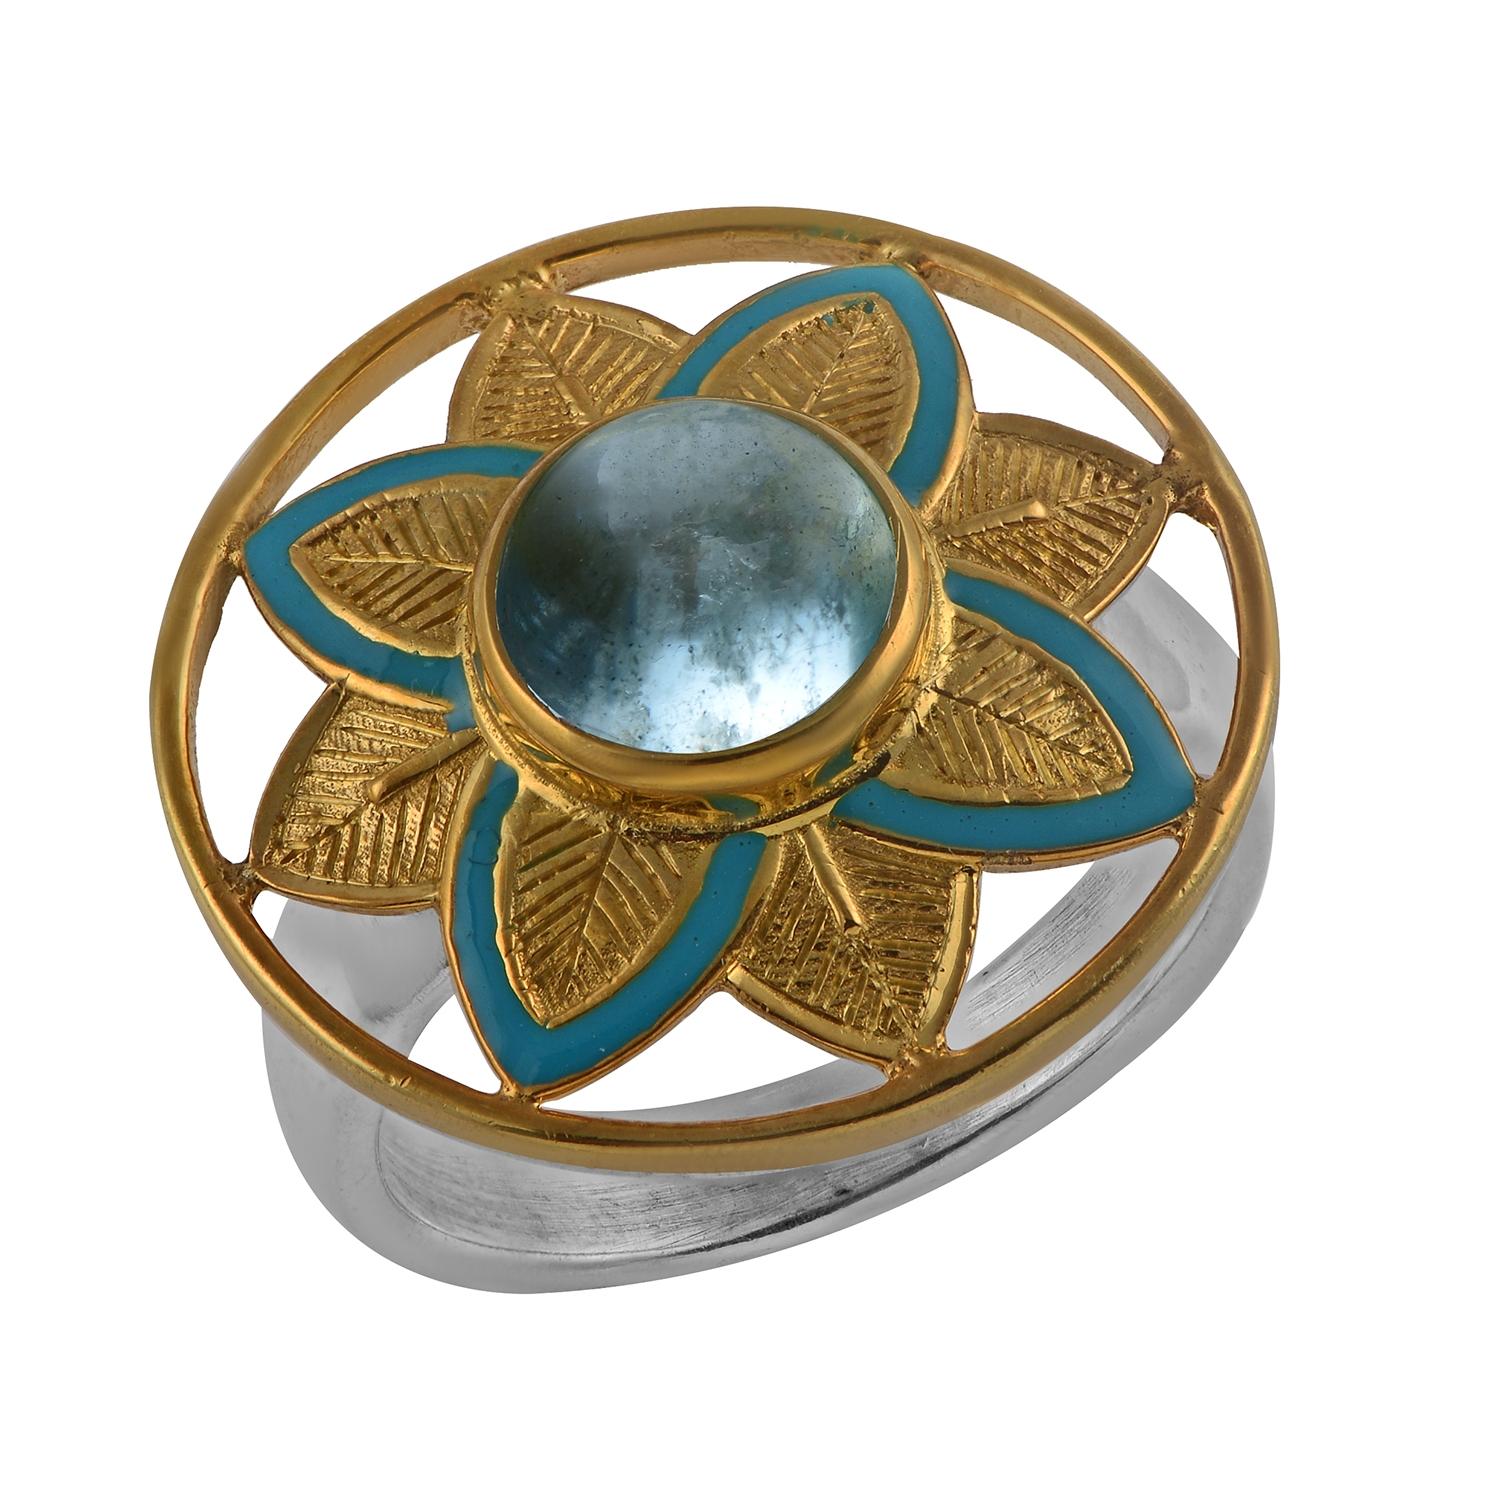 

This striking aquamarine and enamel cocktail ring has been handmade in our workshops. We have used jaali, hand-engraving and enamel work in the ring, and embedded it with an aquamarine. The shank is made in hammered sterling silver and the top of